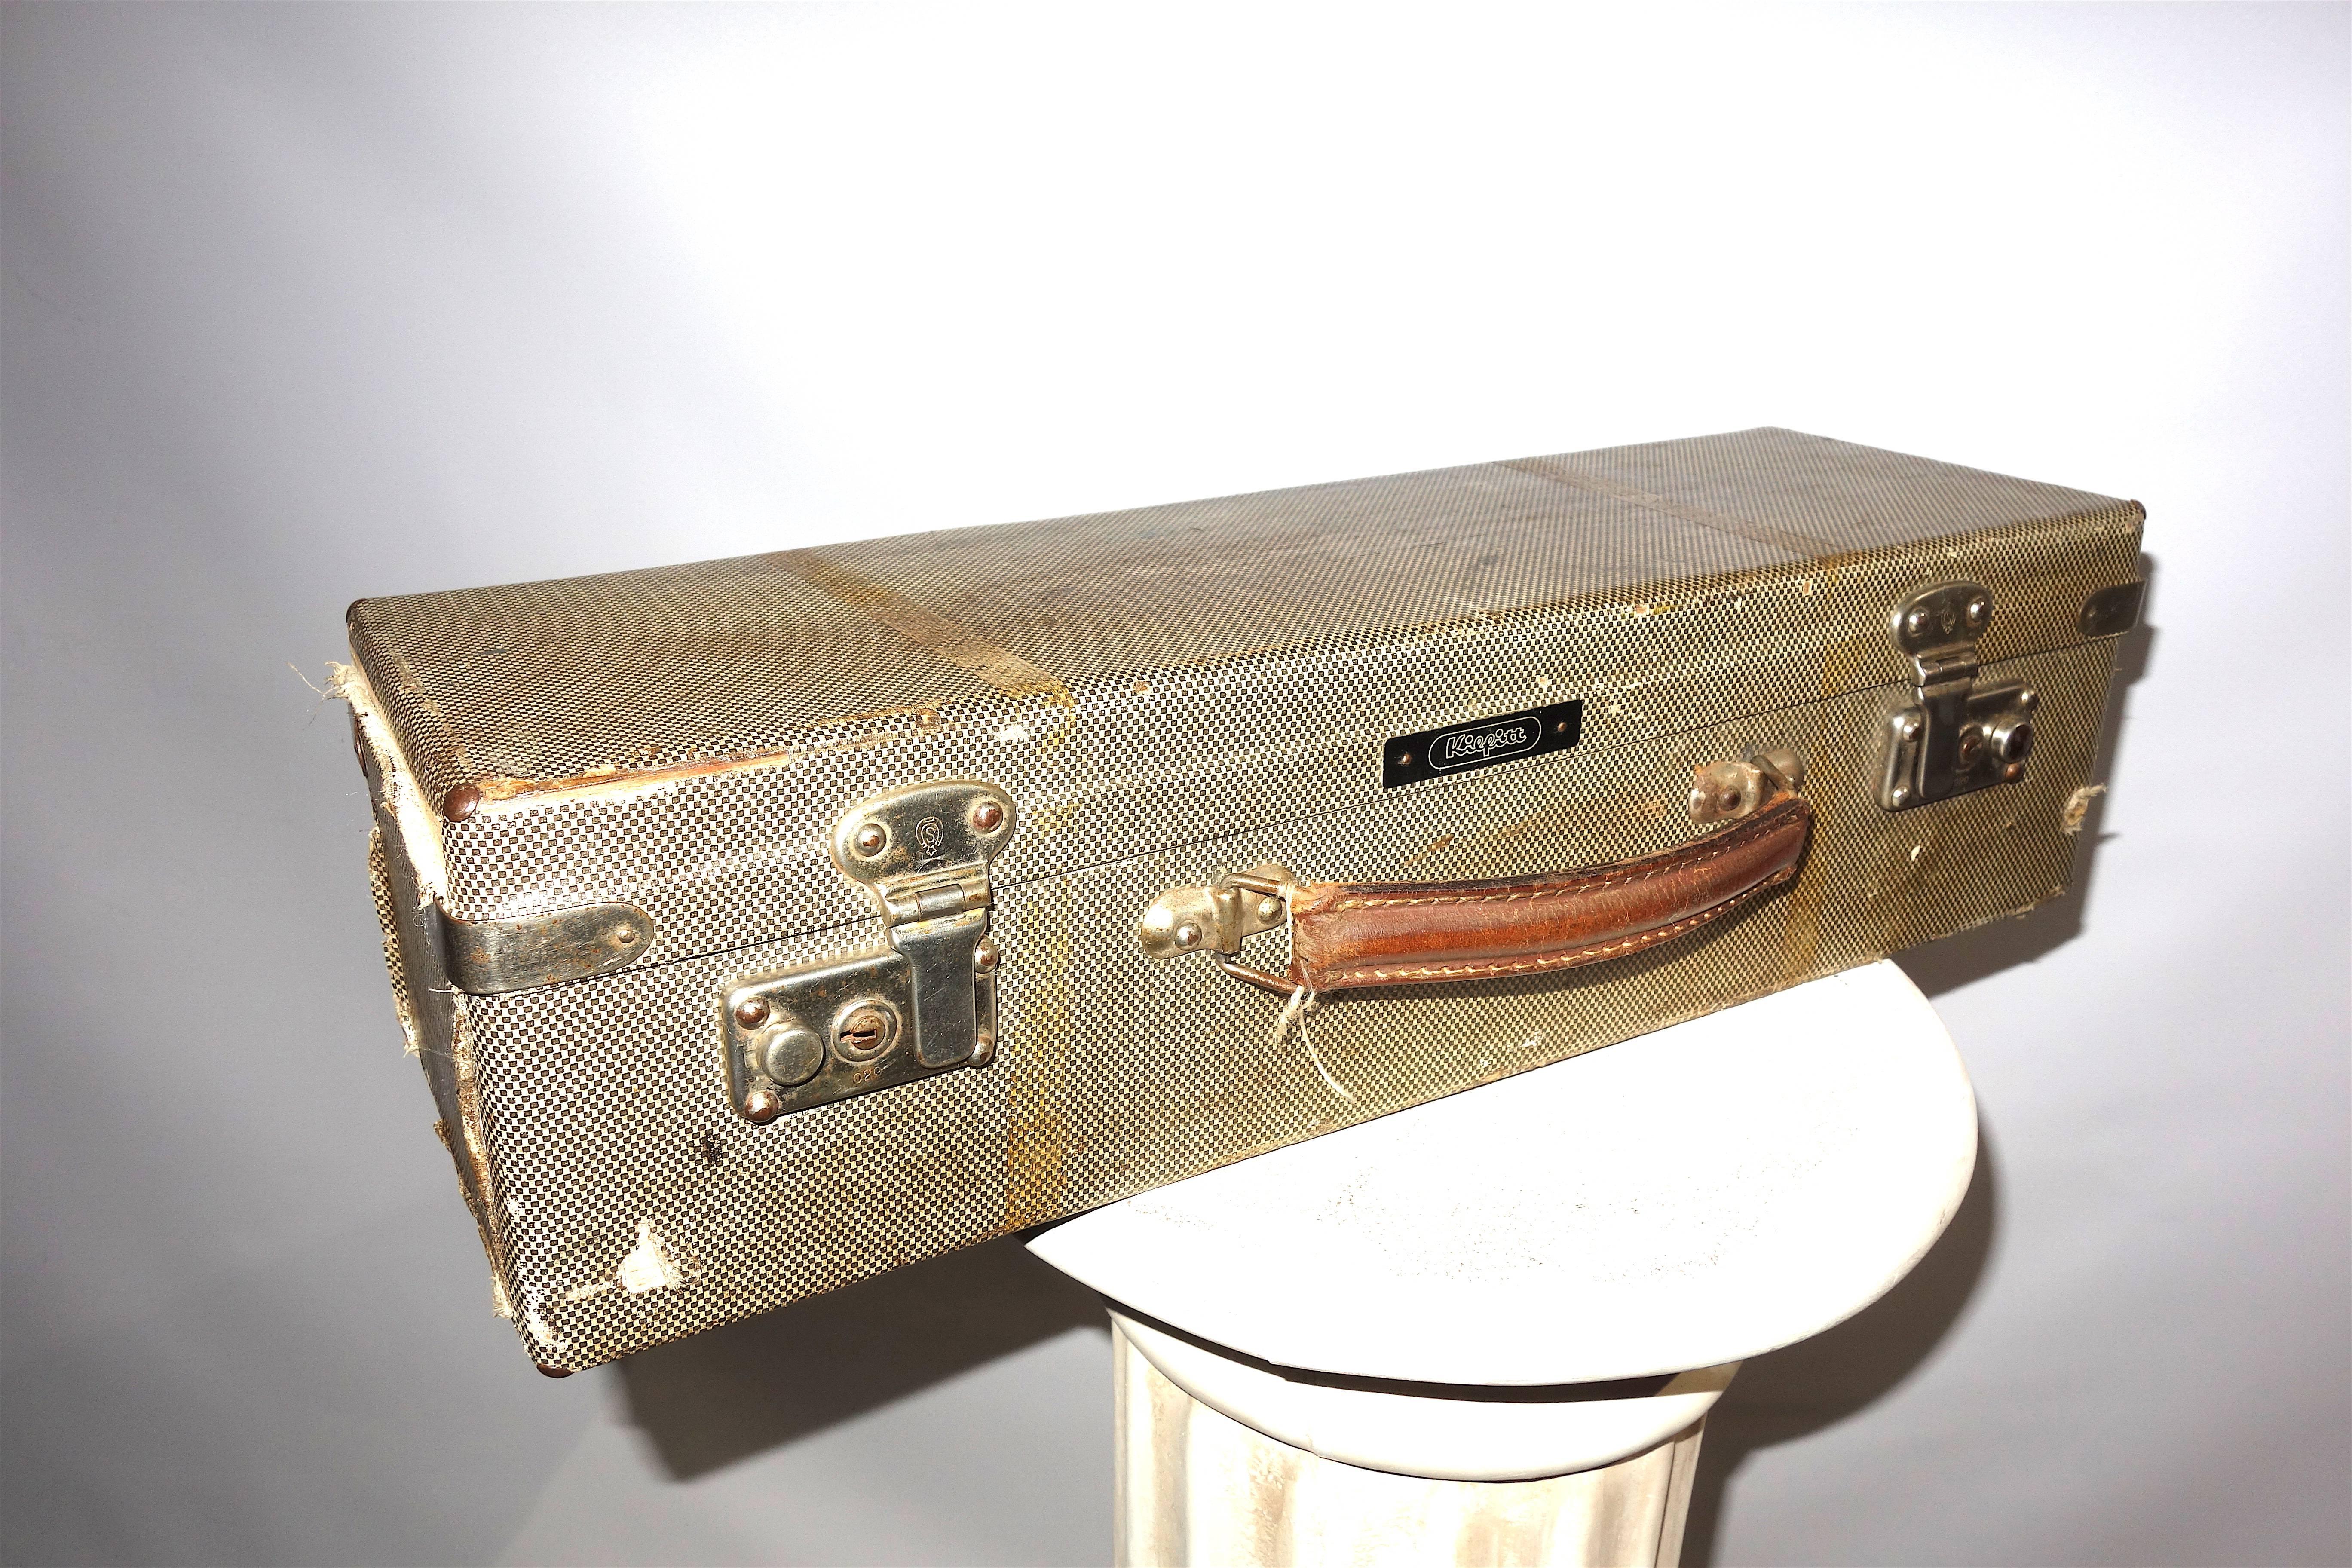 ~~~~~~~~~~~~~~~~~~~~~~~~
Note:
This antique MAY qualify for our EXTRA 10-25% off Gallery sale,
Going on now. Please inquire.
~~~~~~~~~~~~~~~~~~~~~~~~

Offered for your consideration is this rare and authentic Cinema Camera Lens Equipment carry case 